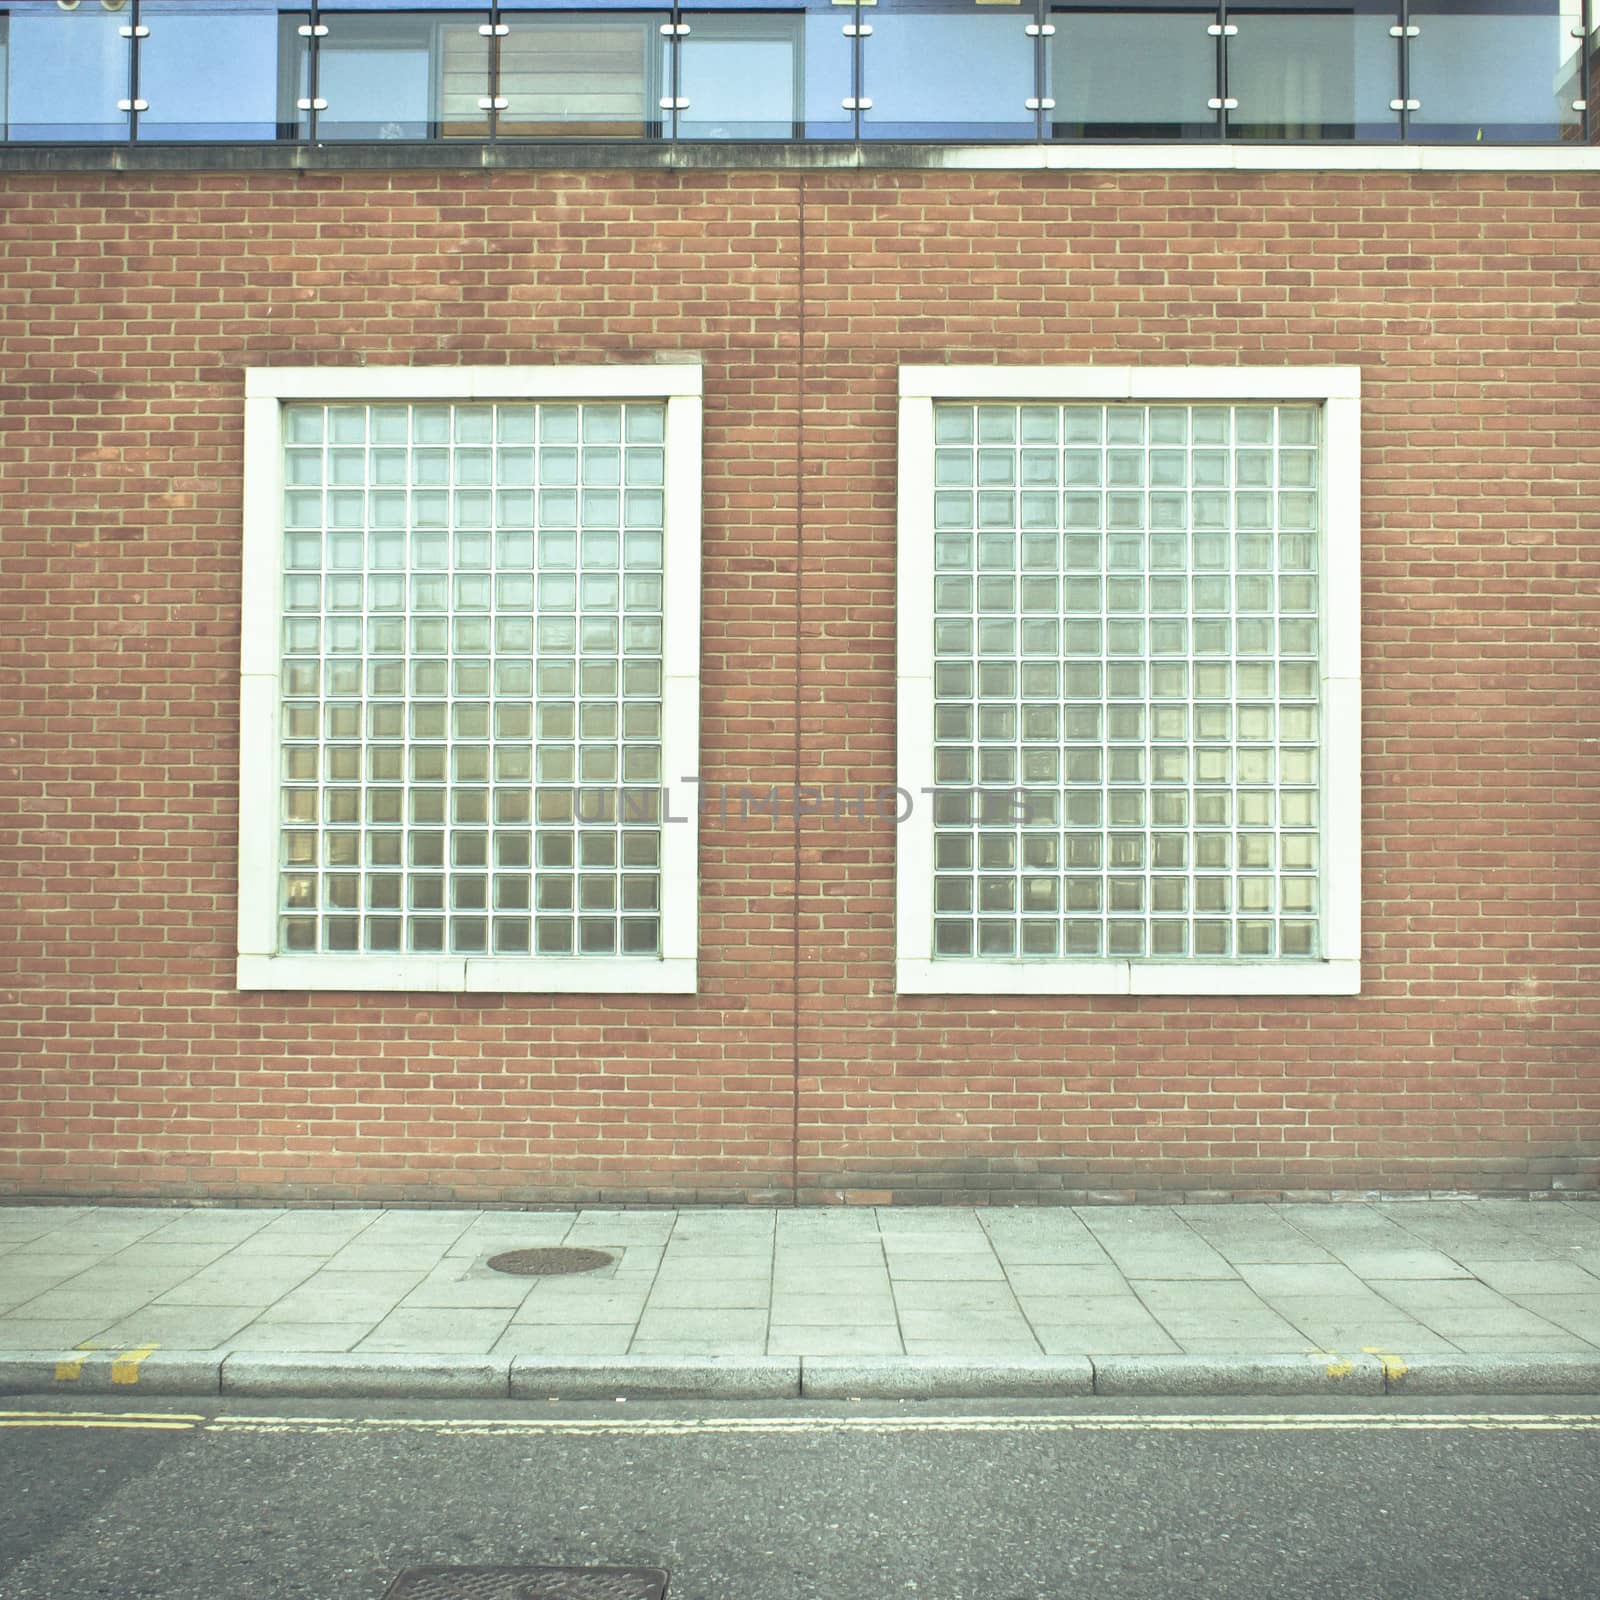 Two glass brick windows in a wall of an urban building